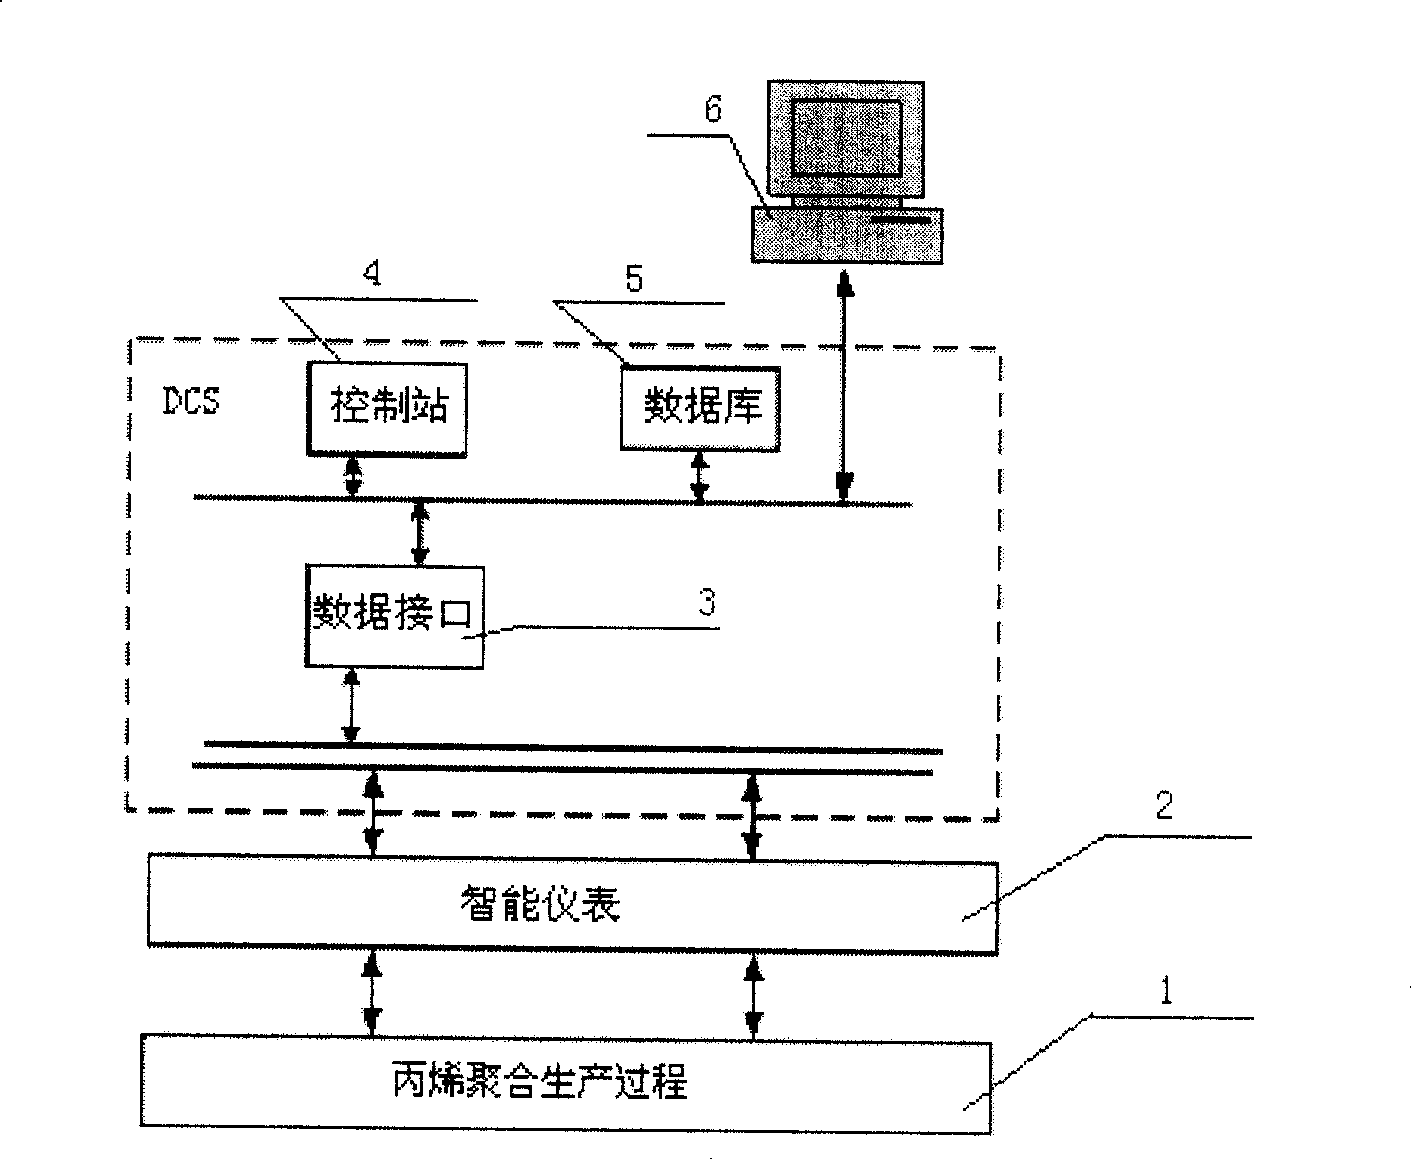 Melt index detection fault diagnosis system and method for industrial polypropylene production